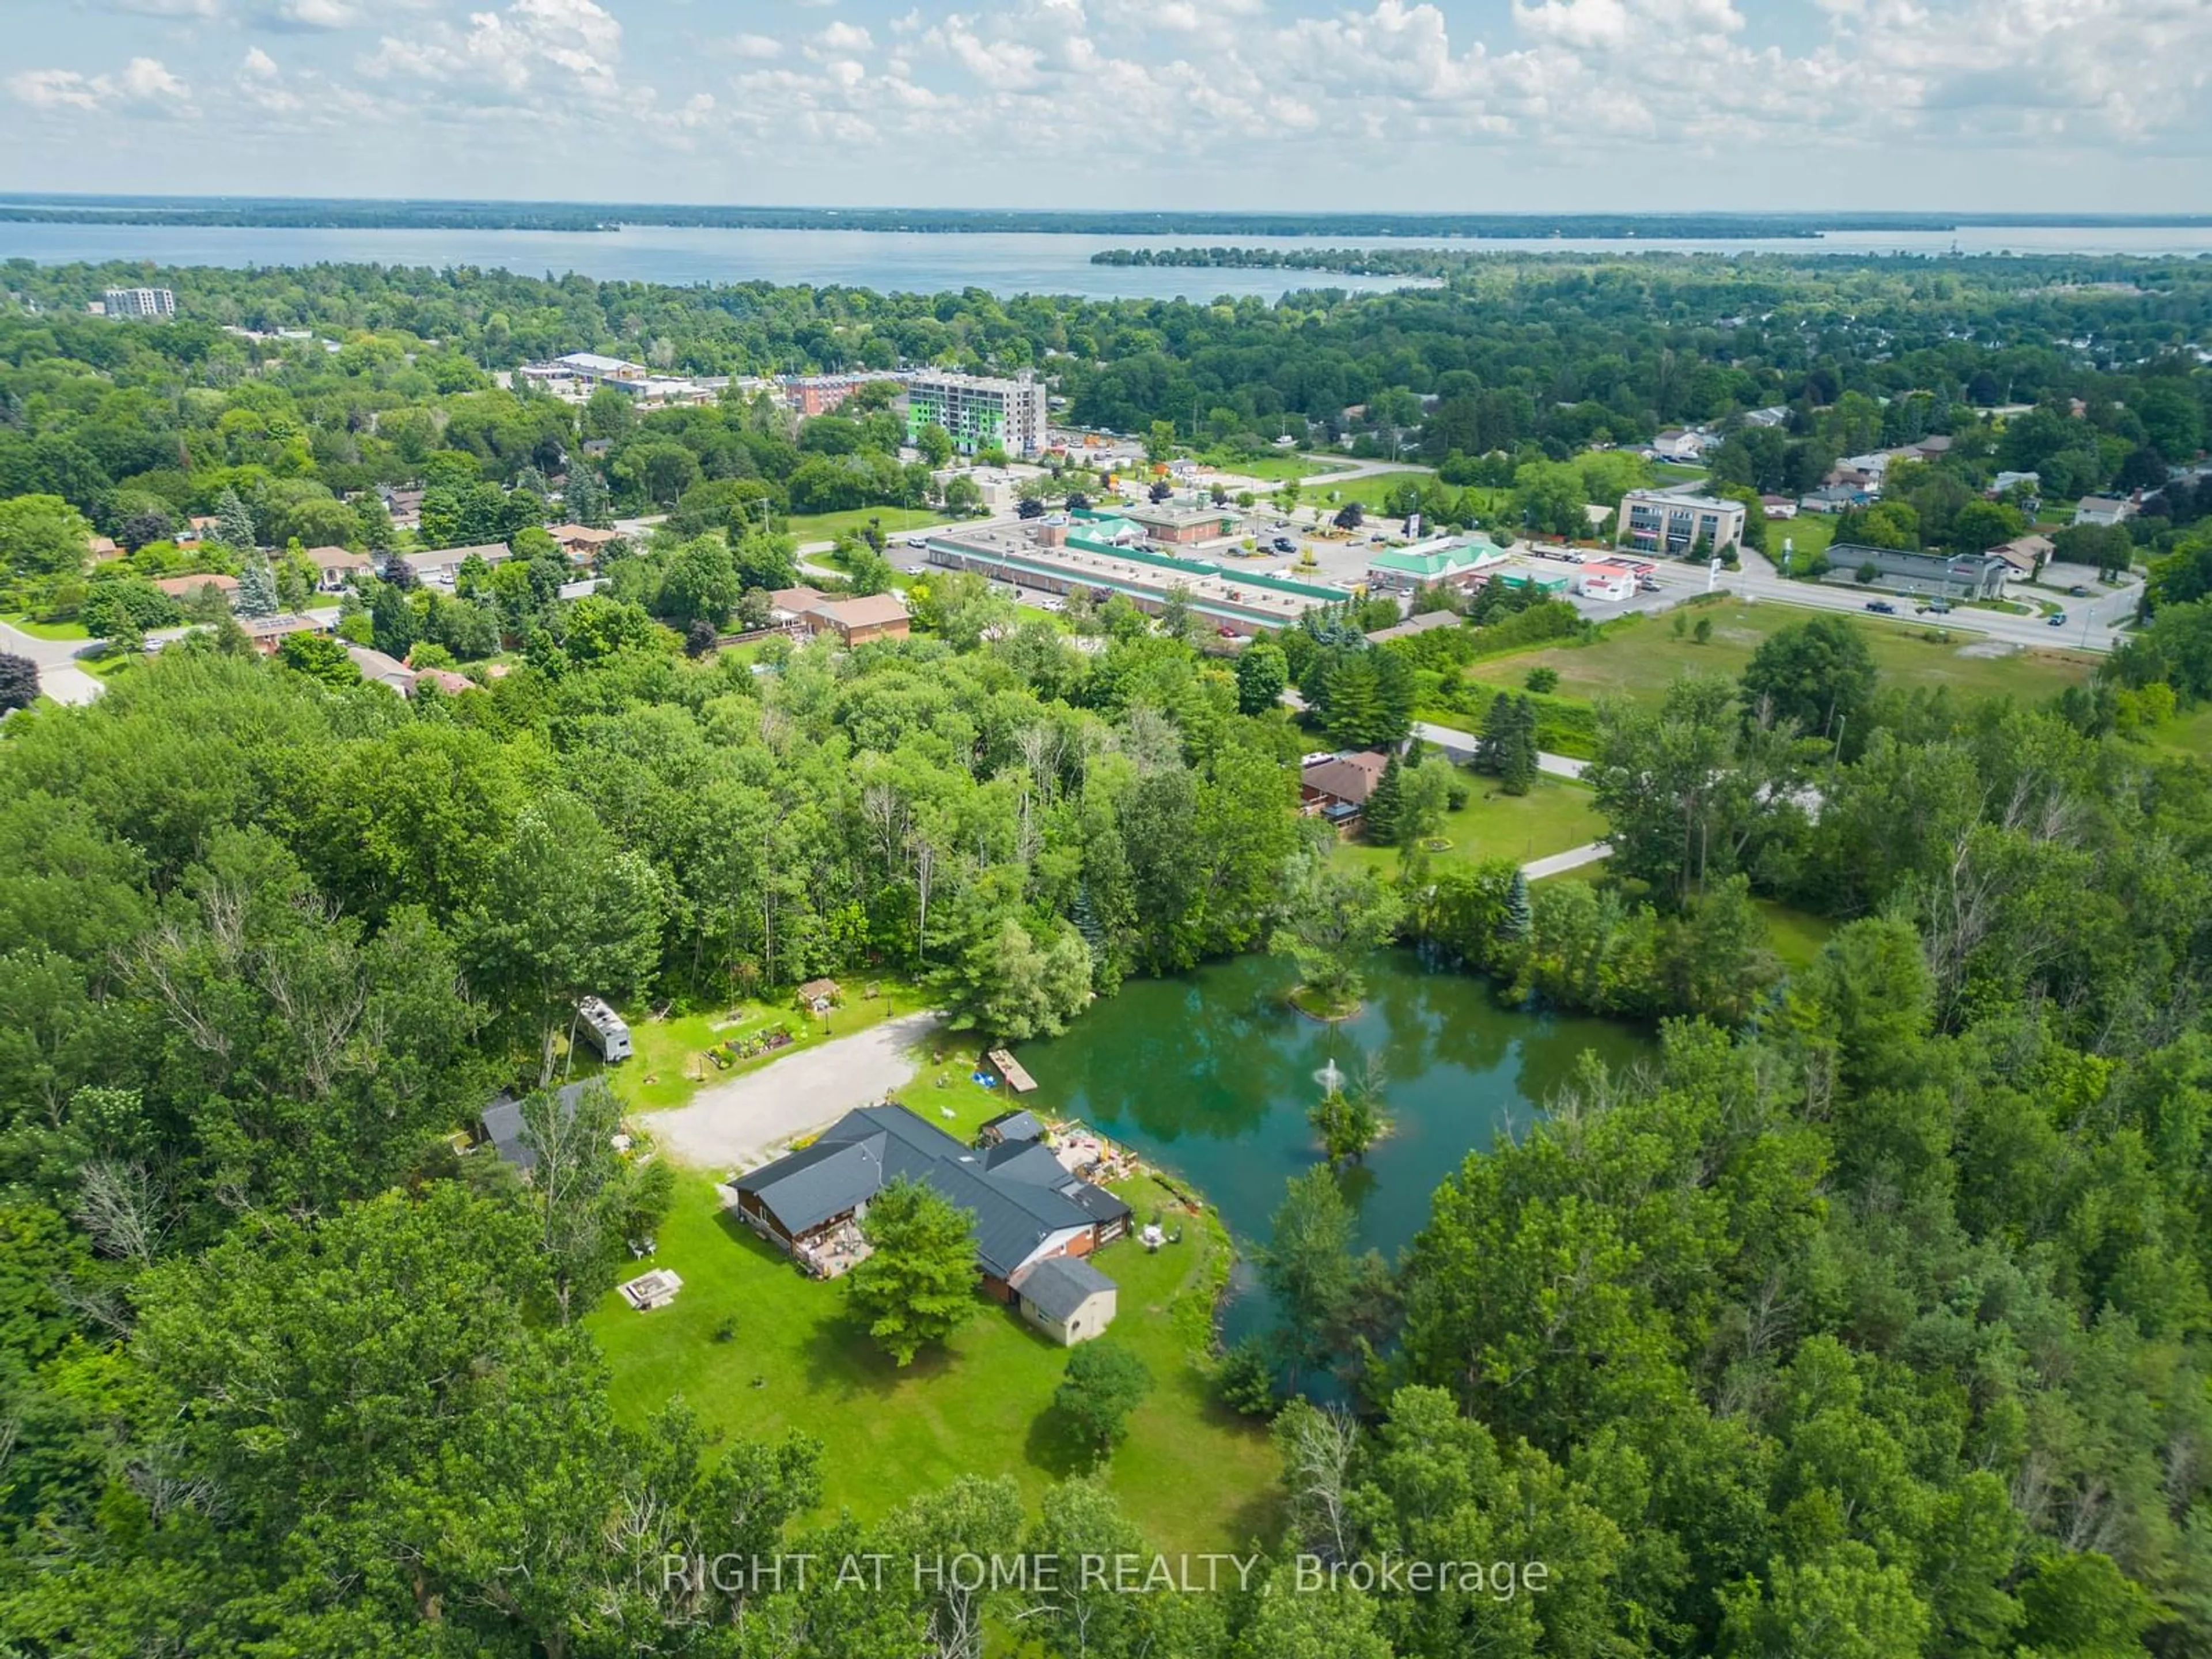 Lakeview for 1114 Goshen Rd, Innisfil Ontario L9S 2M5